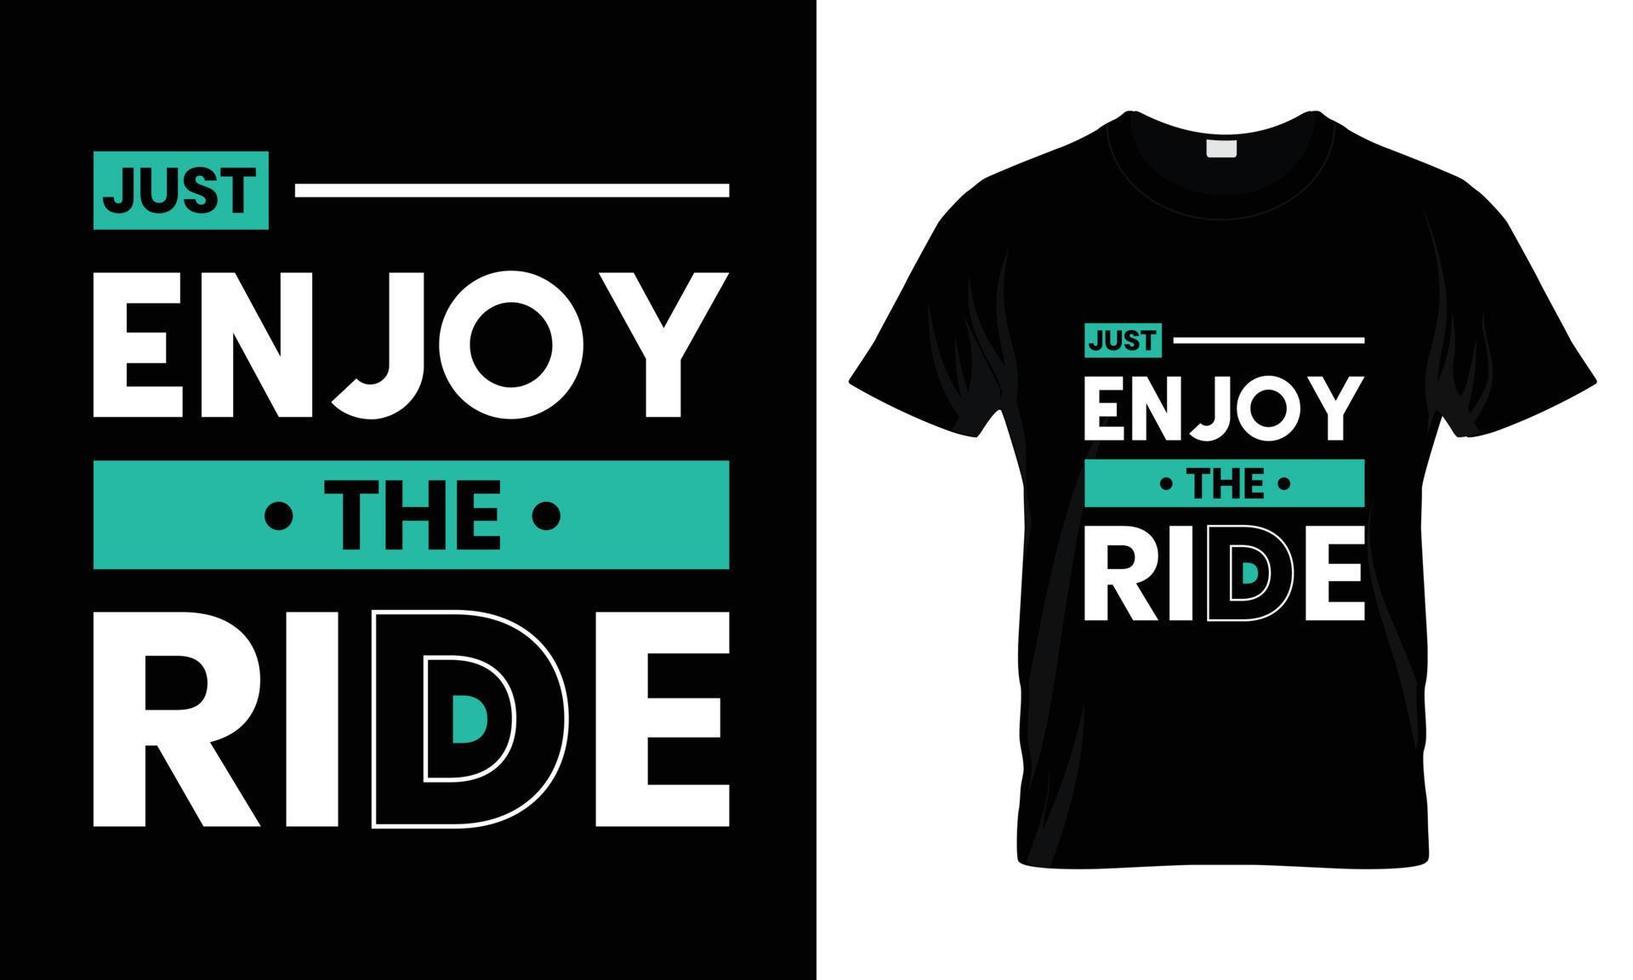 Just Enjoy the ride Modern Quotes T Shirt Design vector